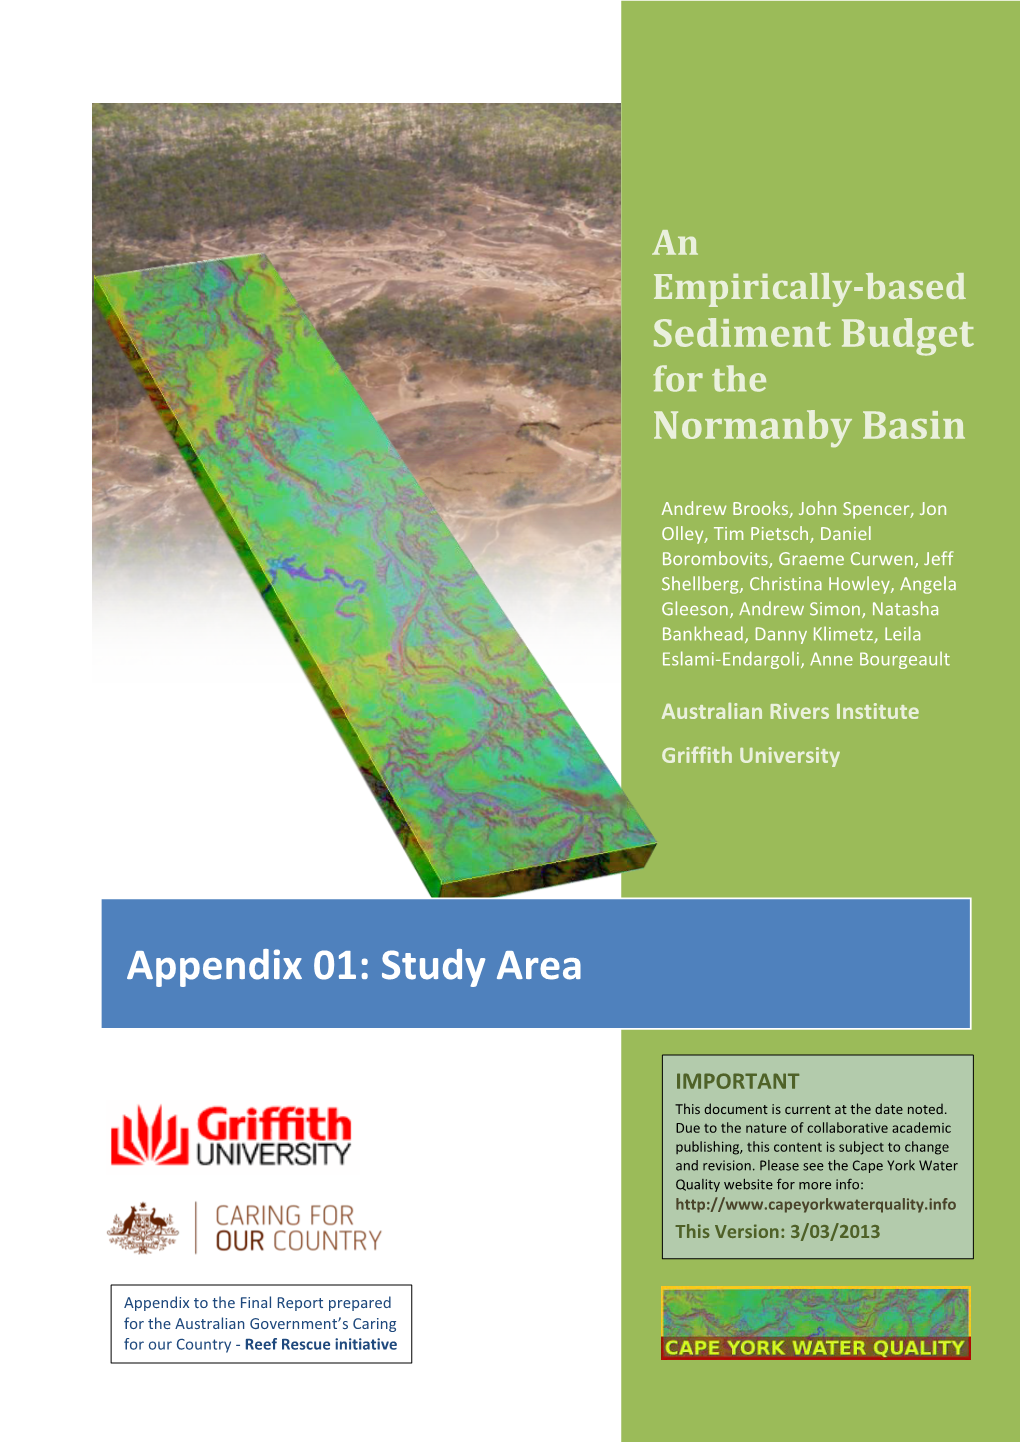 An Empirically-Based Sediment Budget for the Normanby Basin